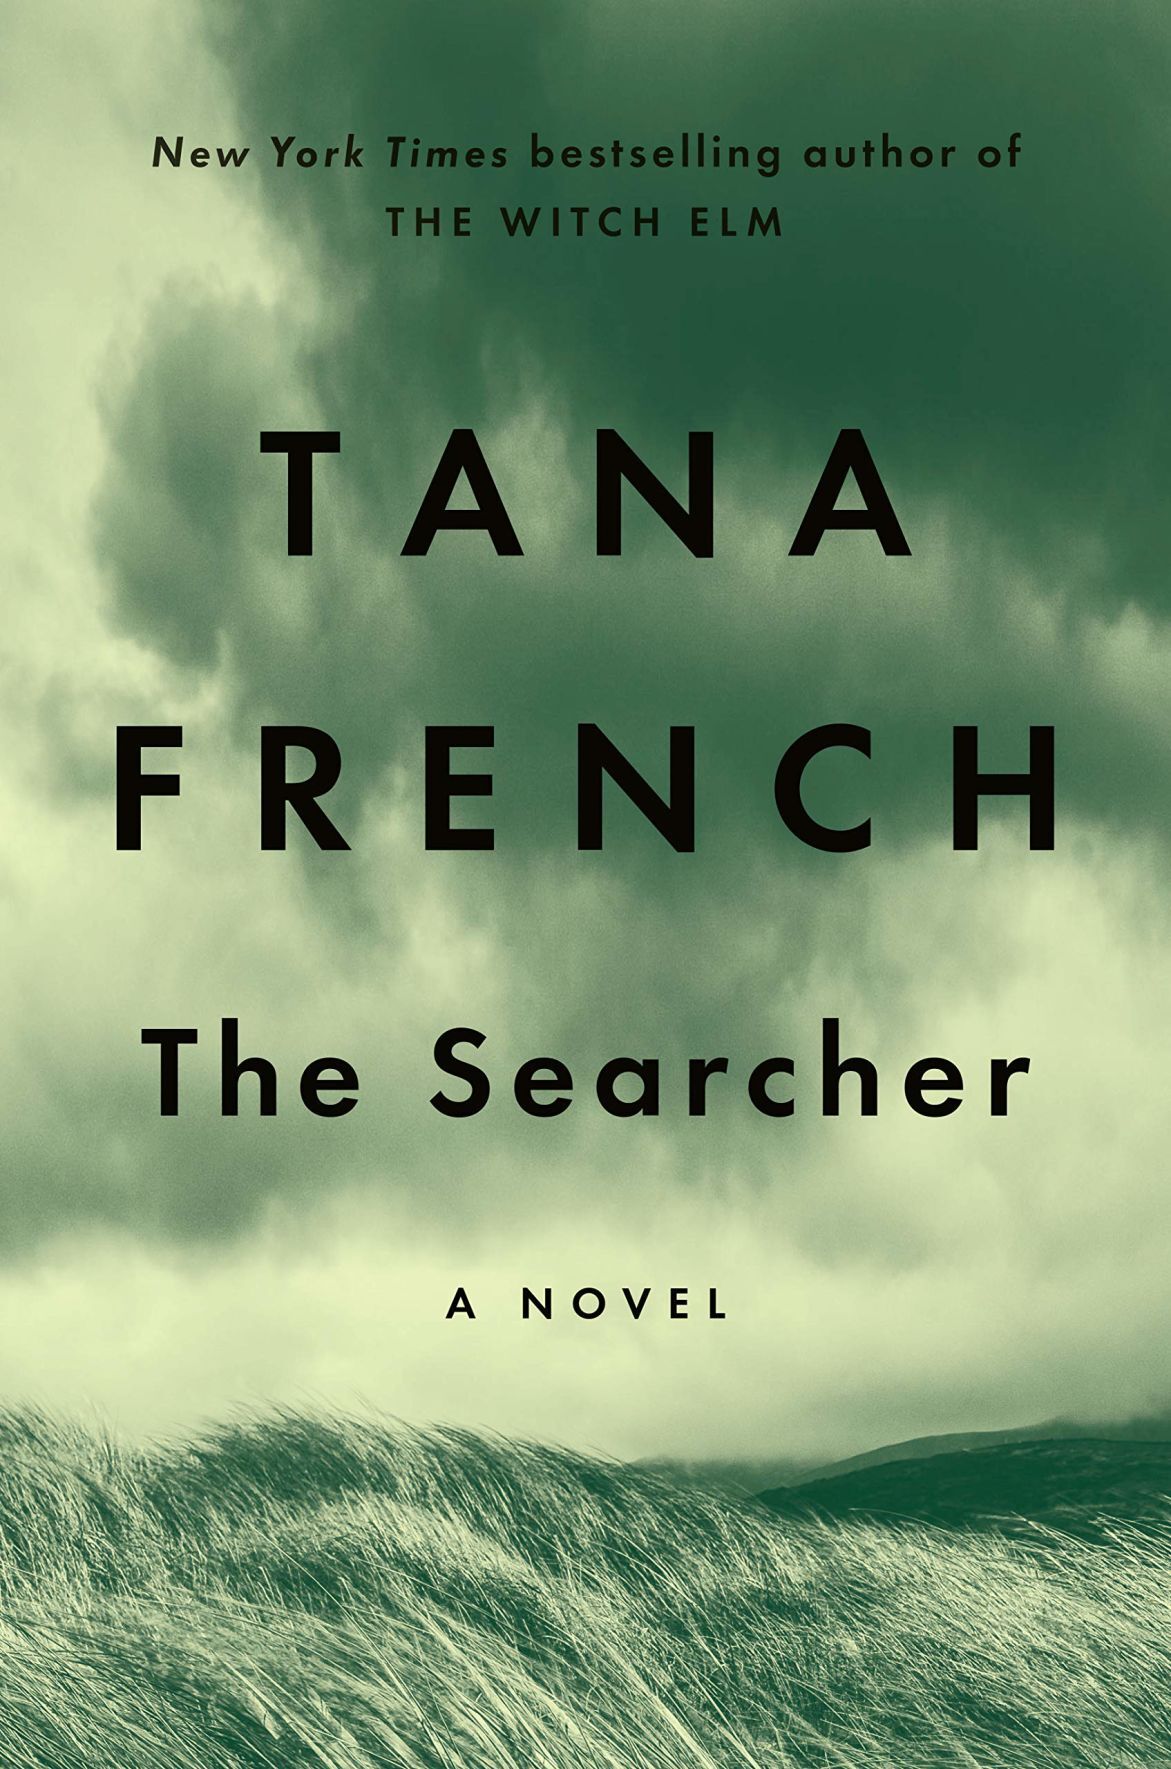 the searcher by tana french review